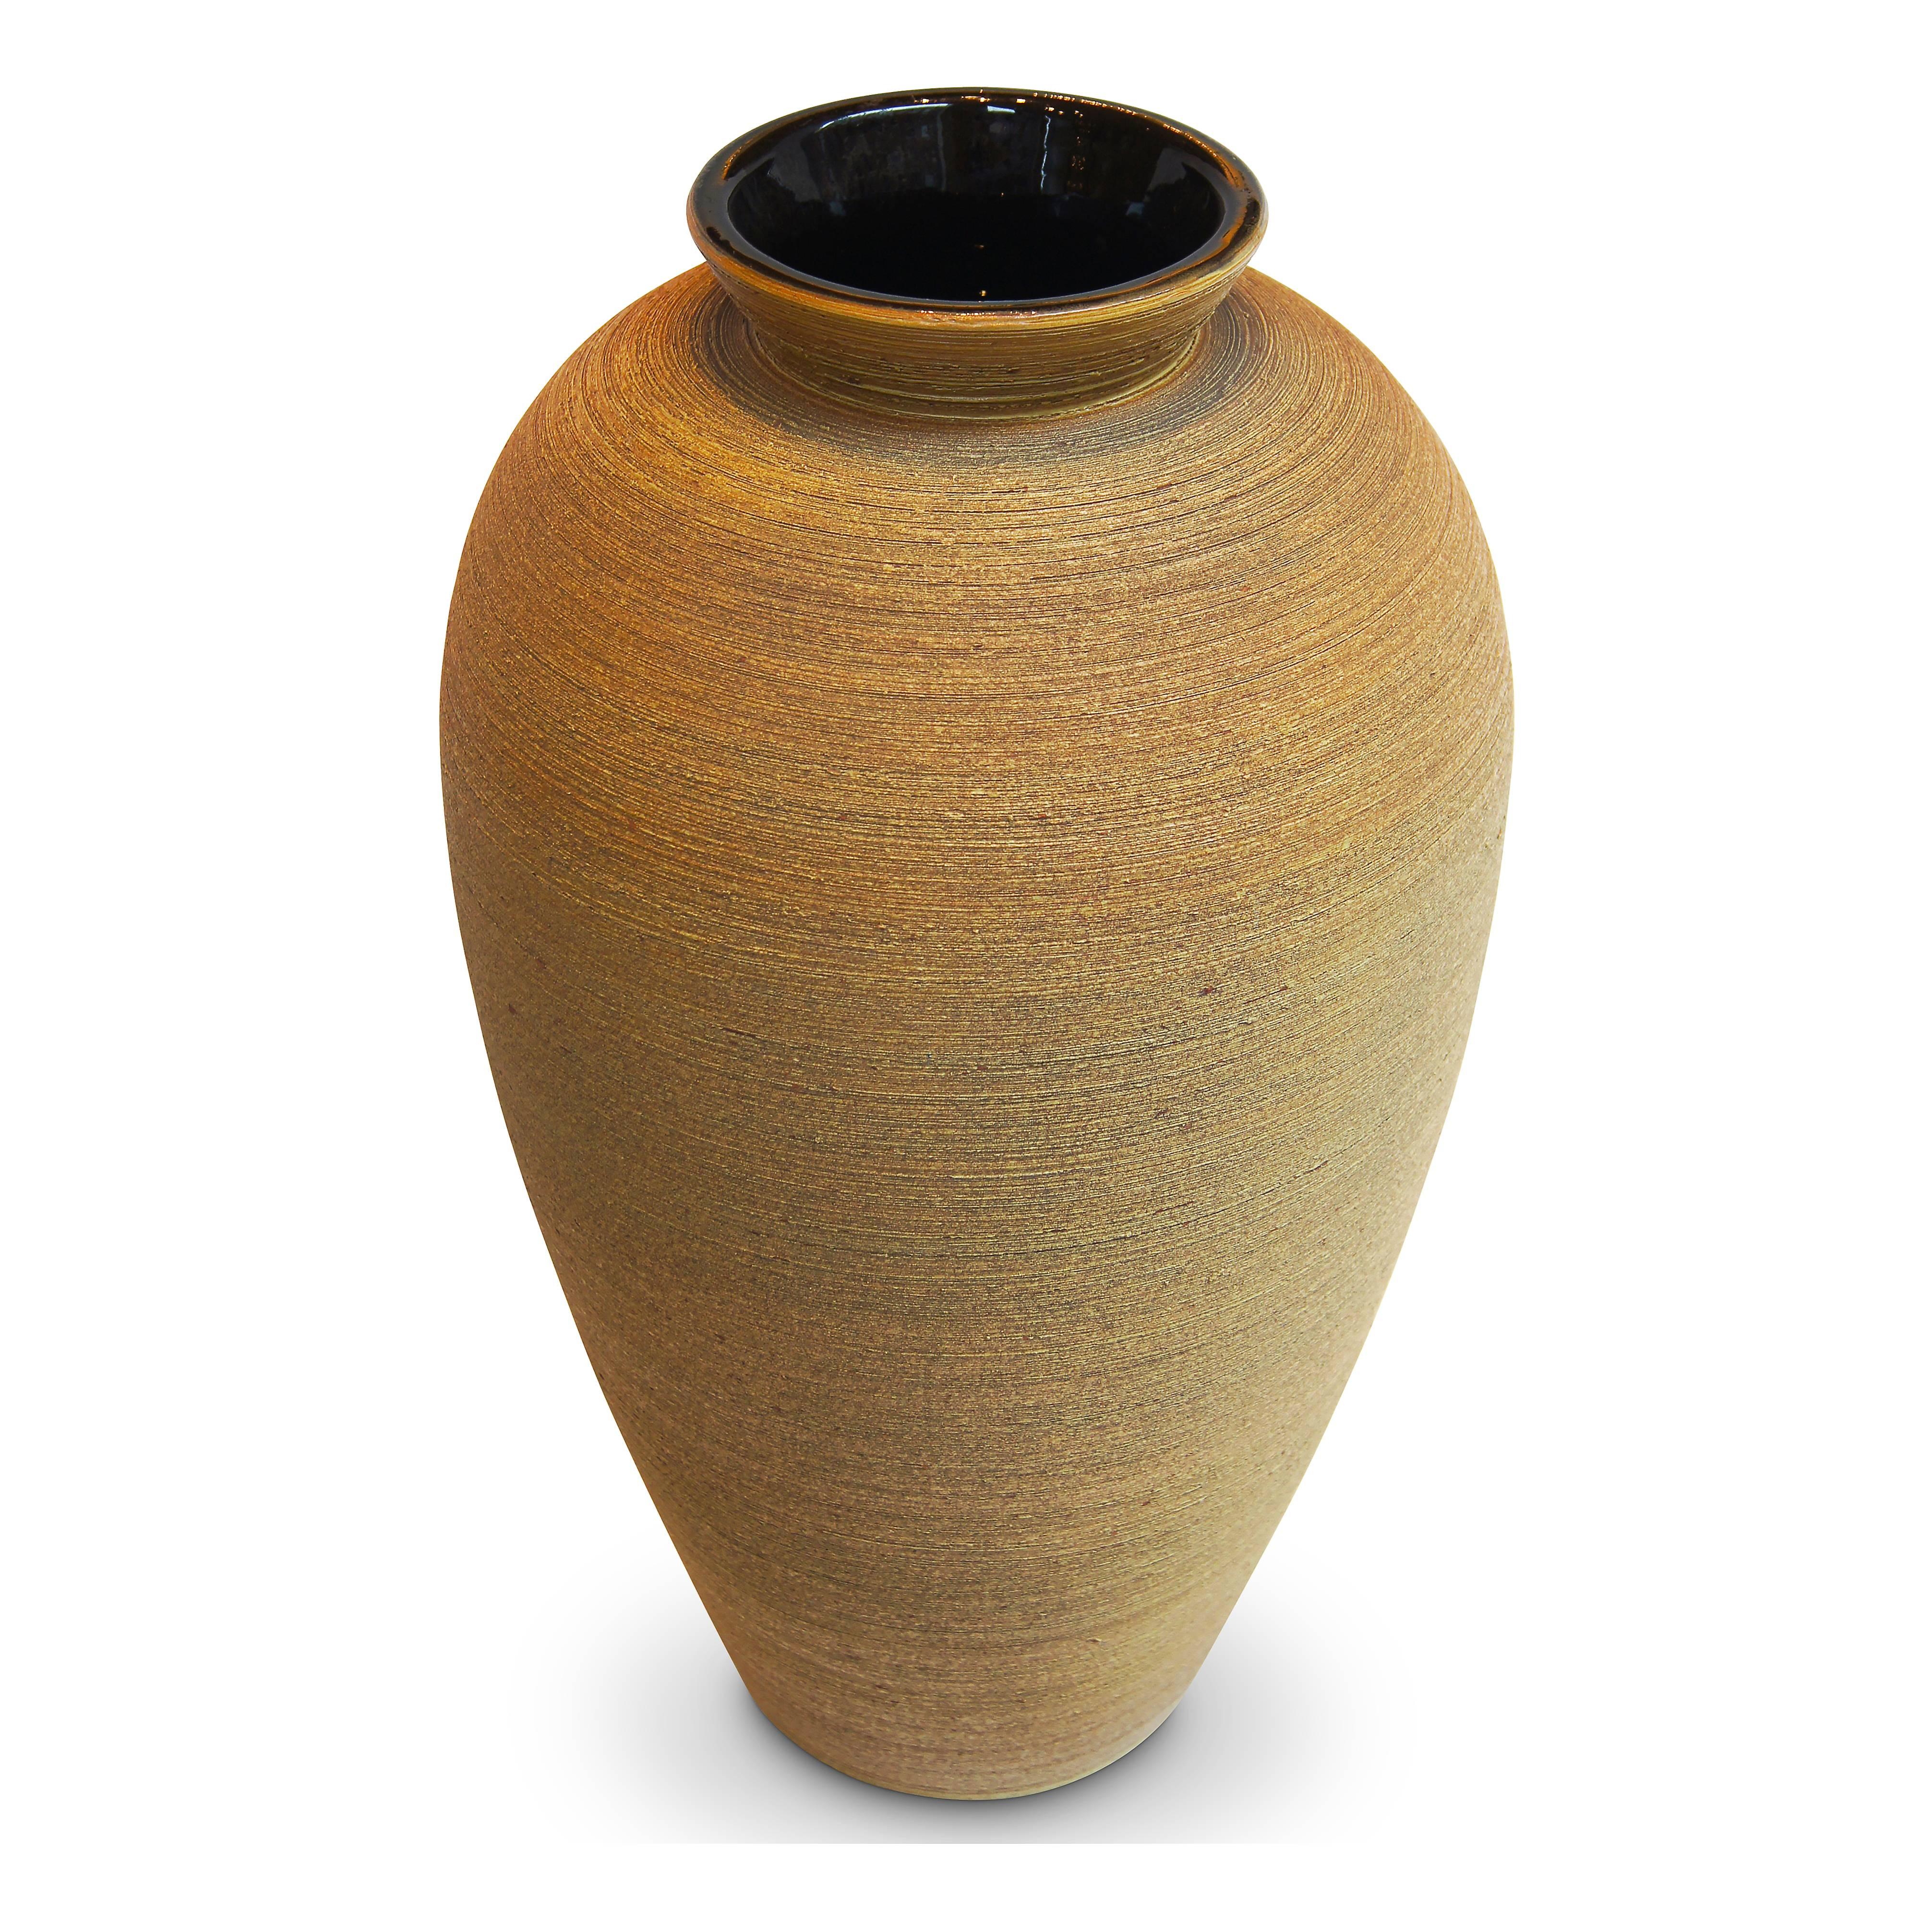 Mid-20th Century Exceptional Monumental Art Deco Vase Duo in Ochre and Aubergine by Upsala Ekeby For Sale